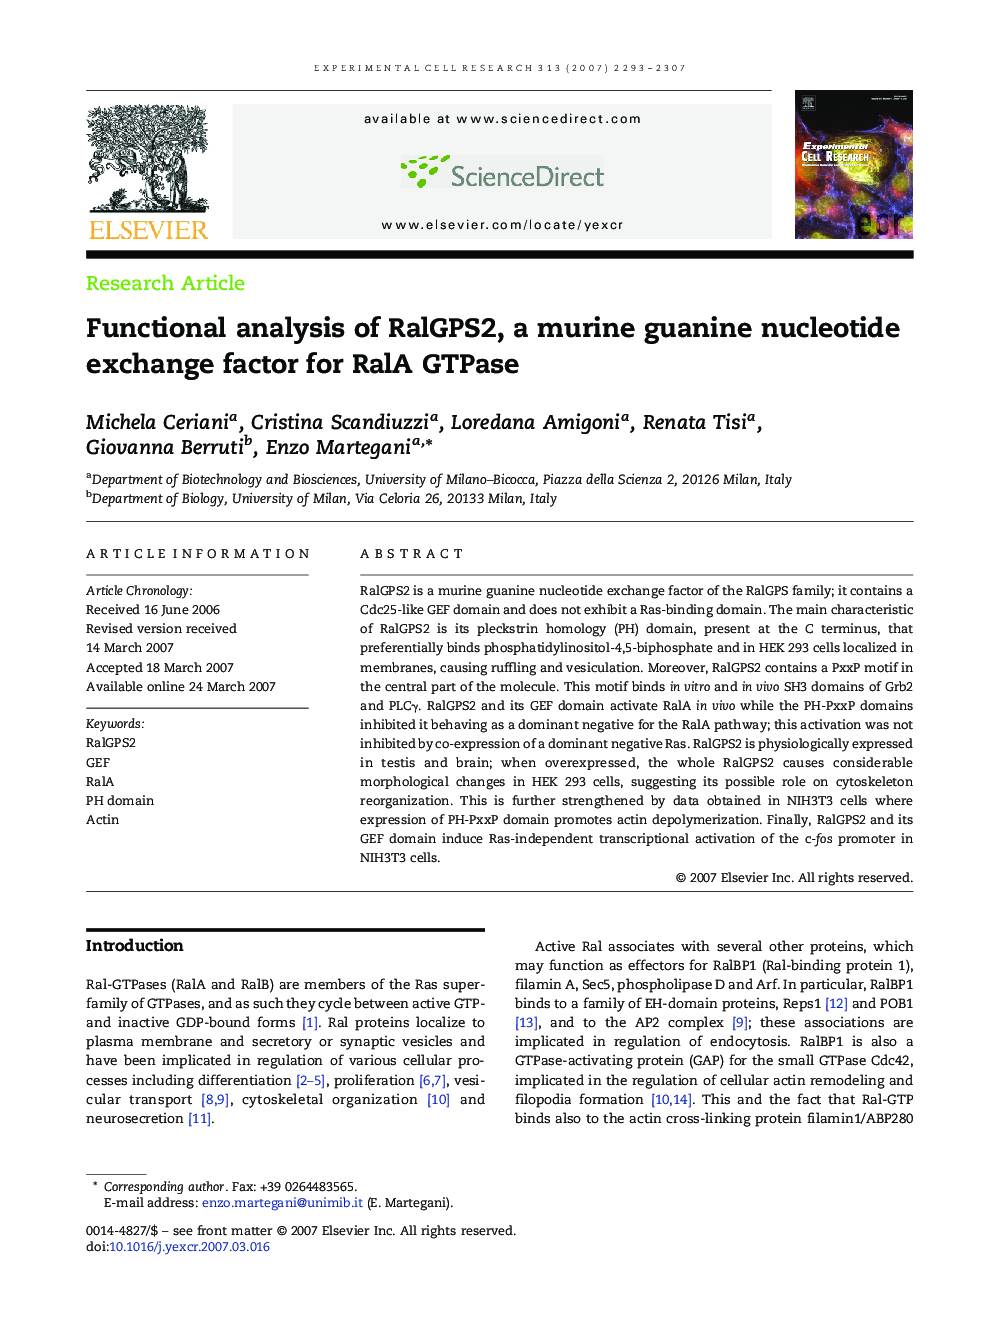 Functional analysis of RalGPS2, a murine guanine nucleotide exchange factor for RalA GTPase